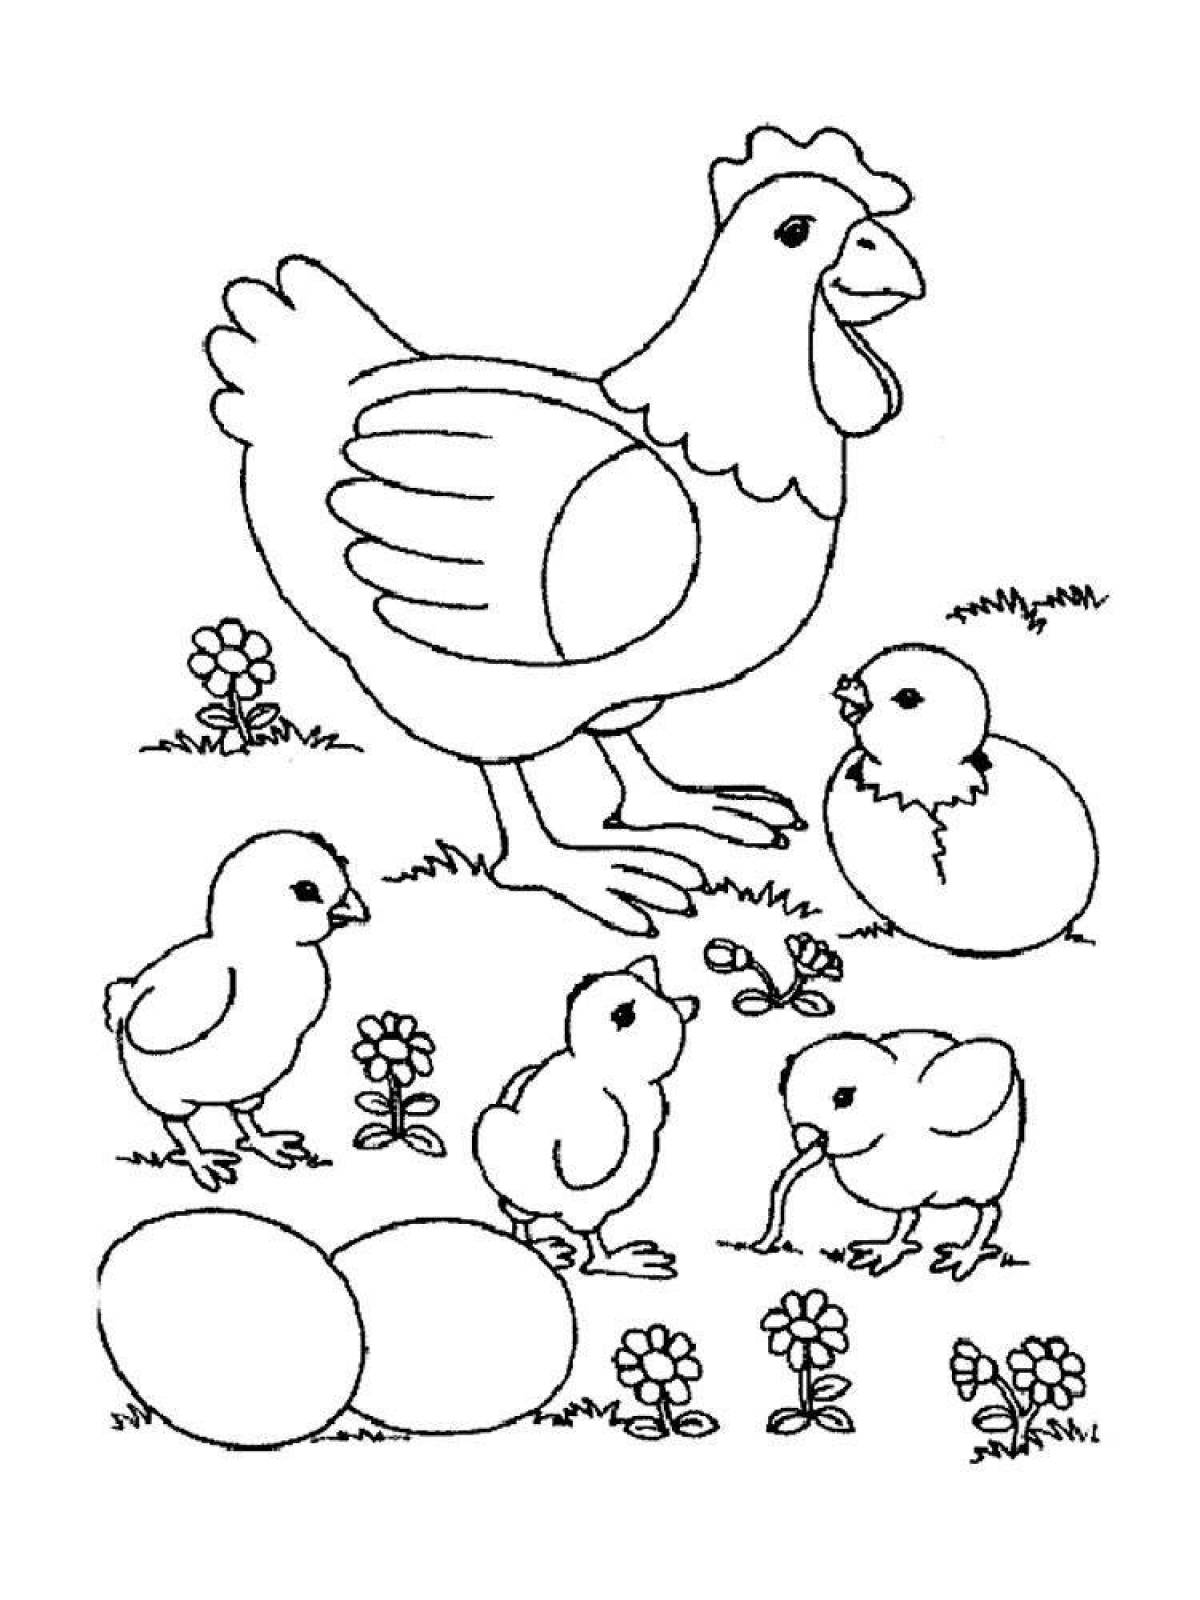 Living bird coloring for kids